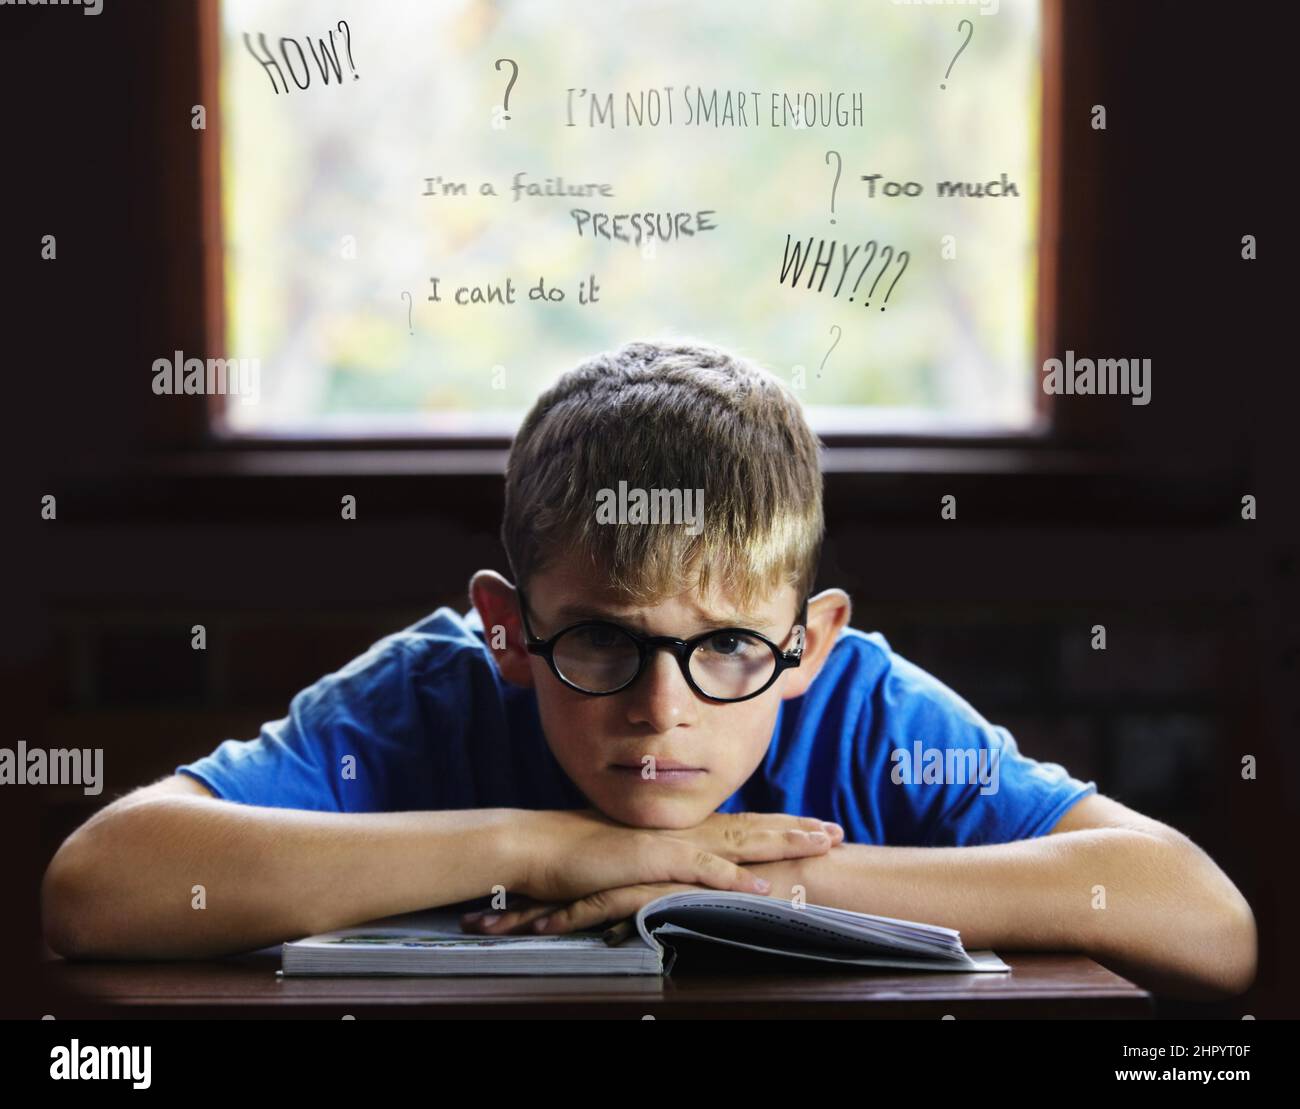 Struggling to learn - Learning disabilities. Young boy feeling overcome with boredom in the classroom. Stock Photo